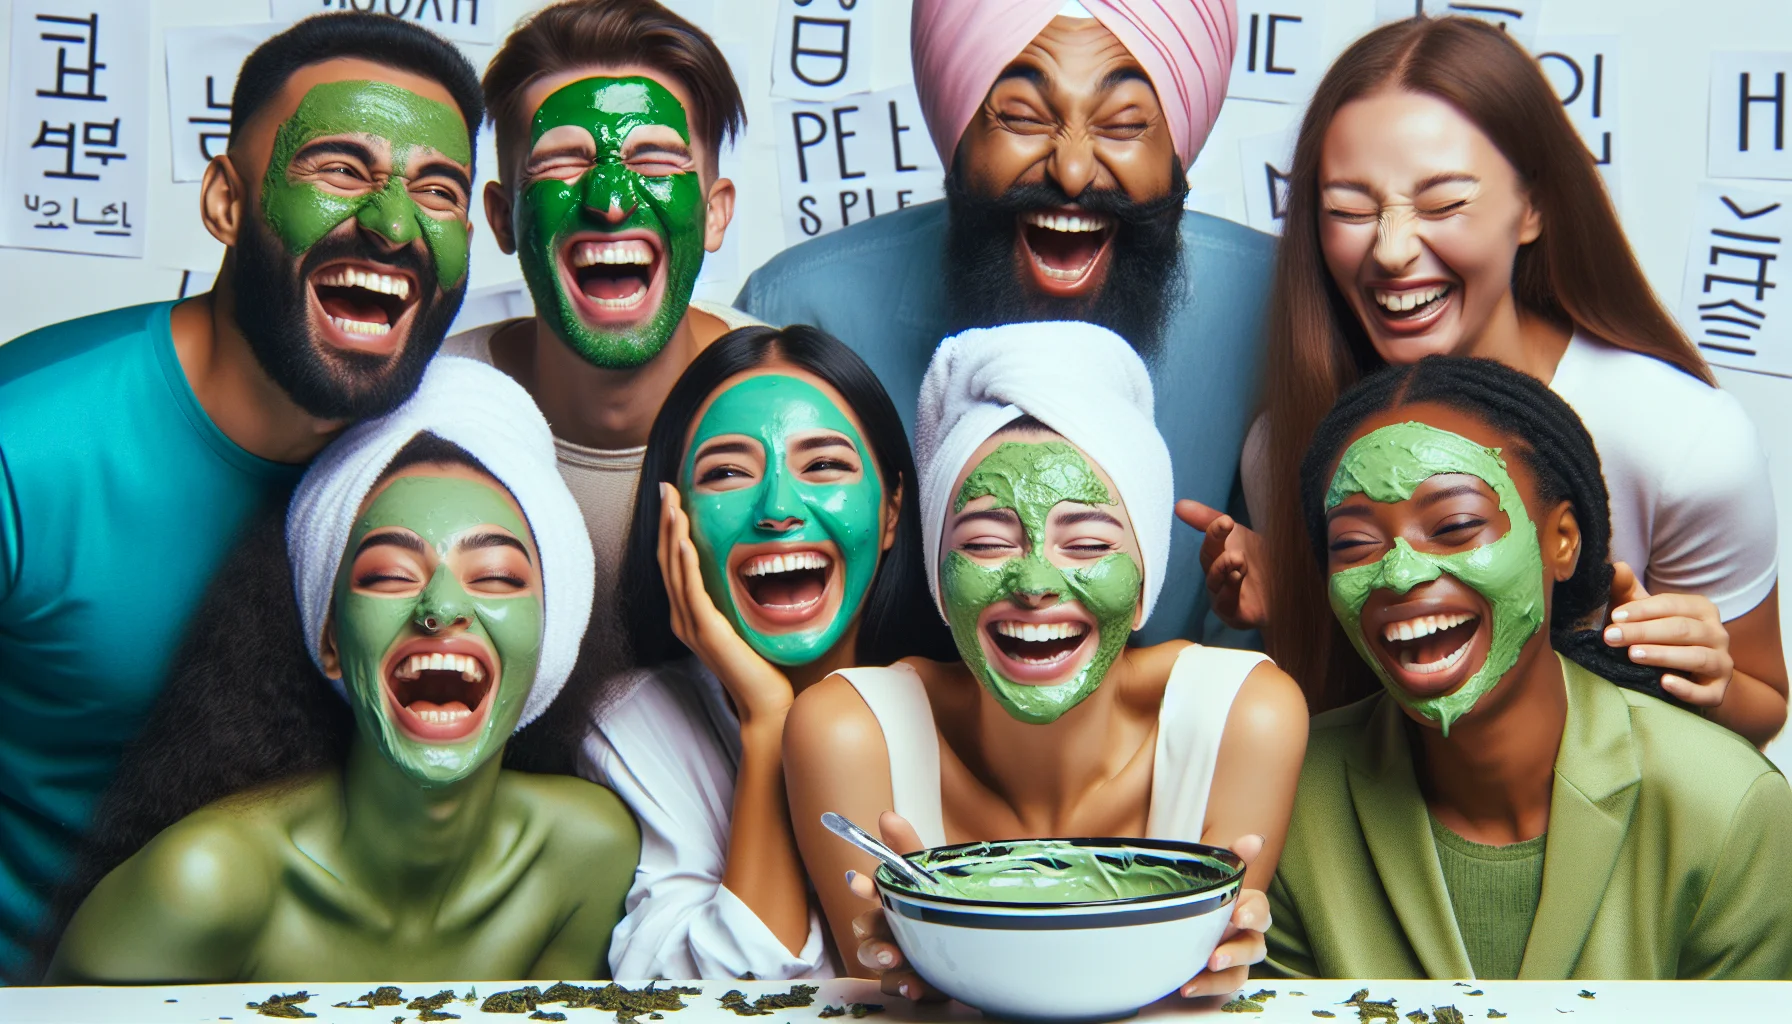 Imagine a humorous scene where a group of friends, each of different descent such as Caucasian, Hispanic, Black, Middle-Eastern, and South Asian are gathered around a bowl of green tea mask. Everyone is laughing, with some wearing the mask on their face. You can see the emerald green paste dripping from their cheeks, filled with excitement and enjoyment. Their atmosphere is contagious, inviting anyone who sees them to join in on the fun of this skincare routine.